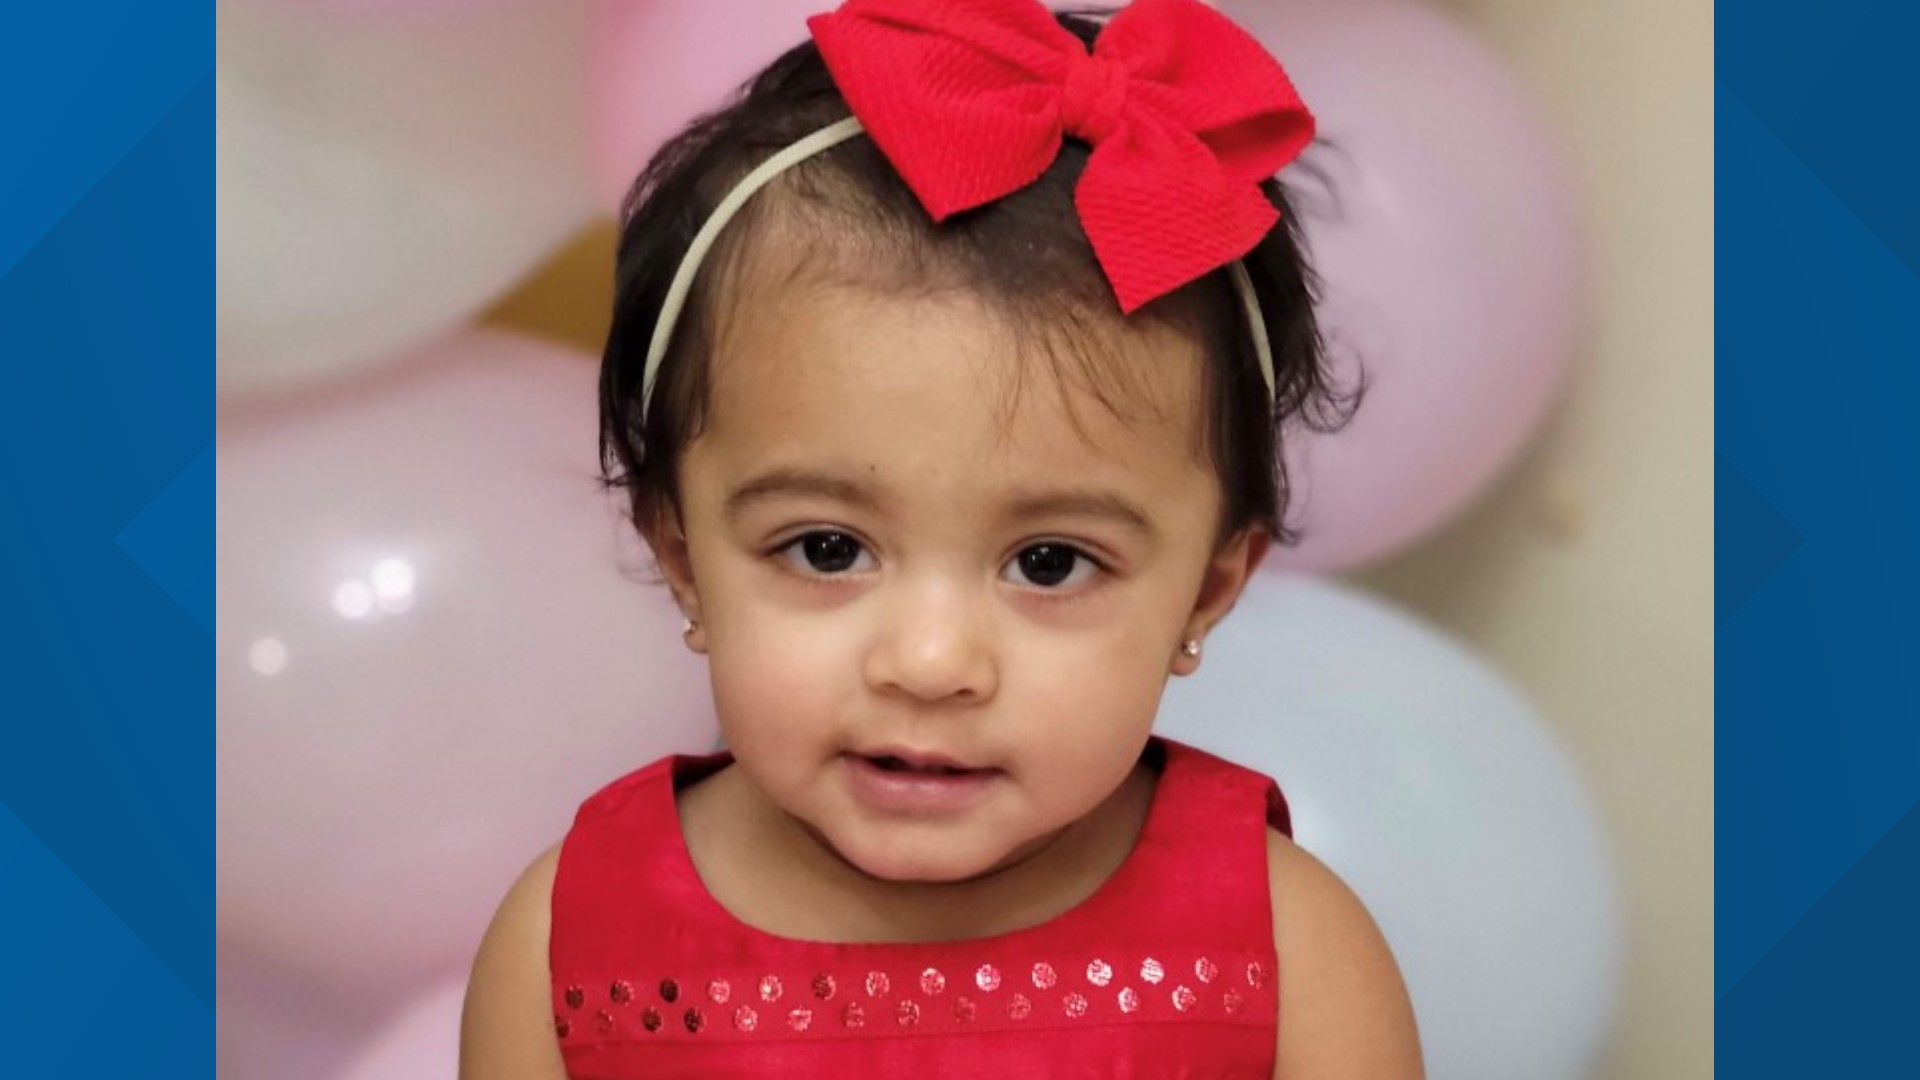 13-month-old Shivani Jishnu was like so many other babies smart, funny, and loved by her mother, Vini, and father Jishnu.